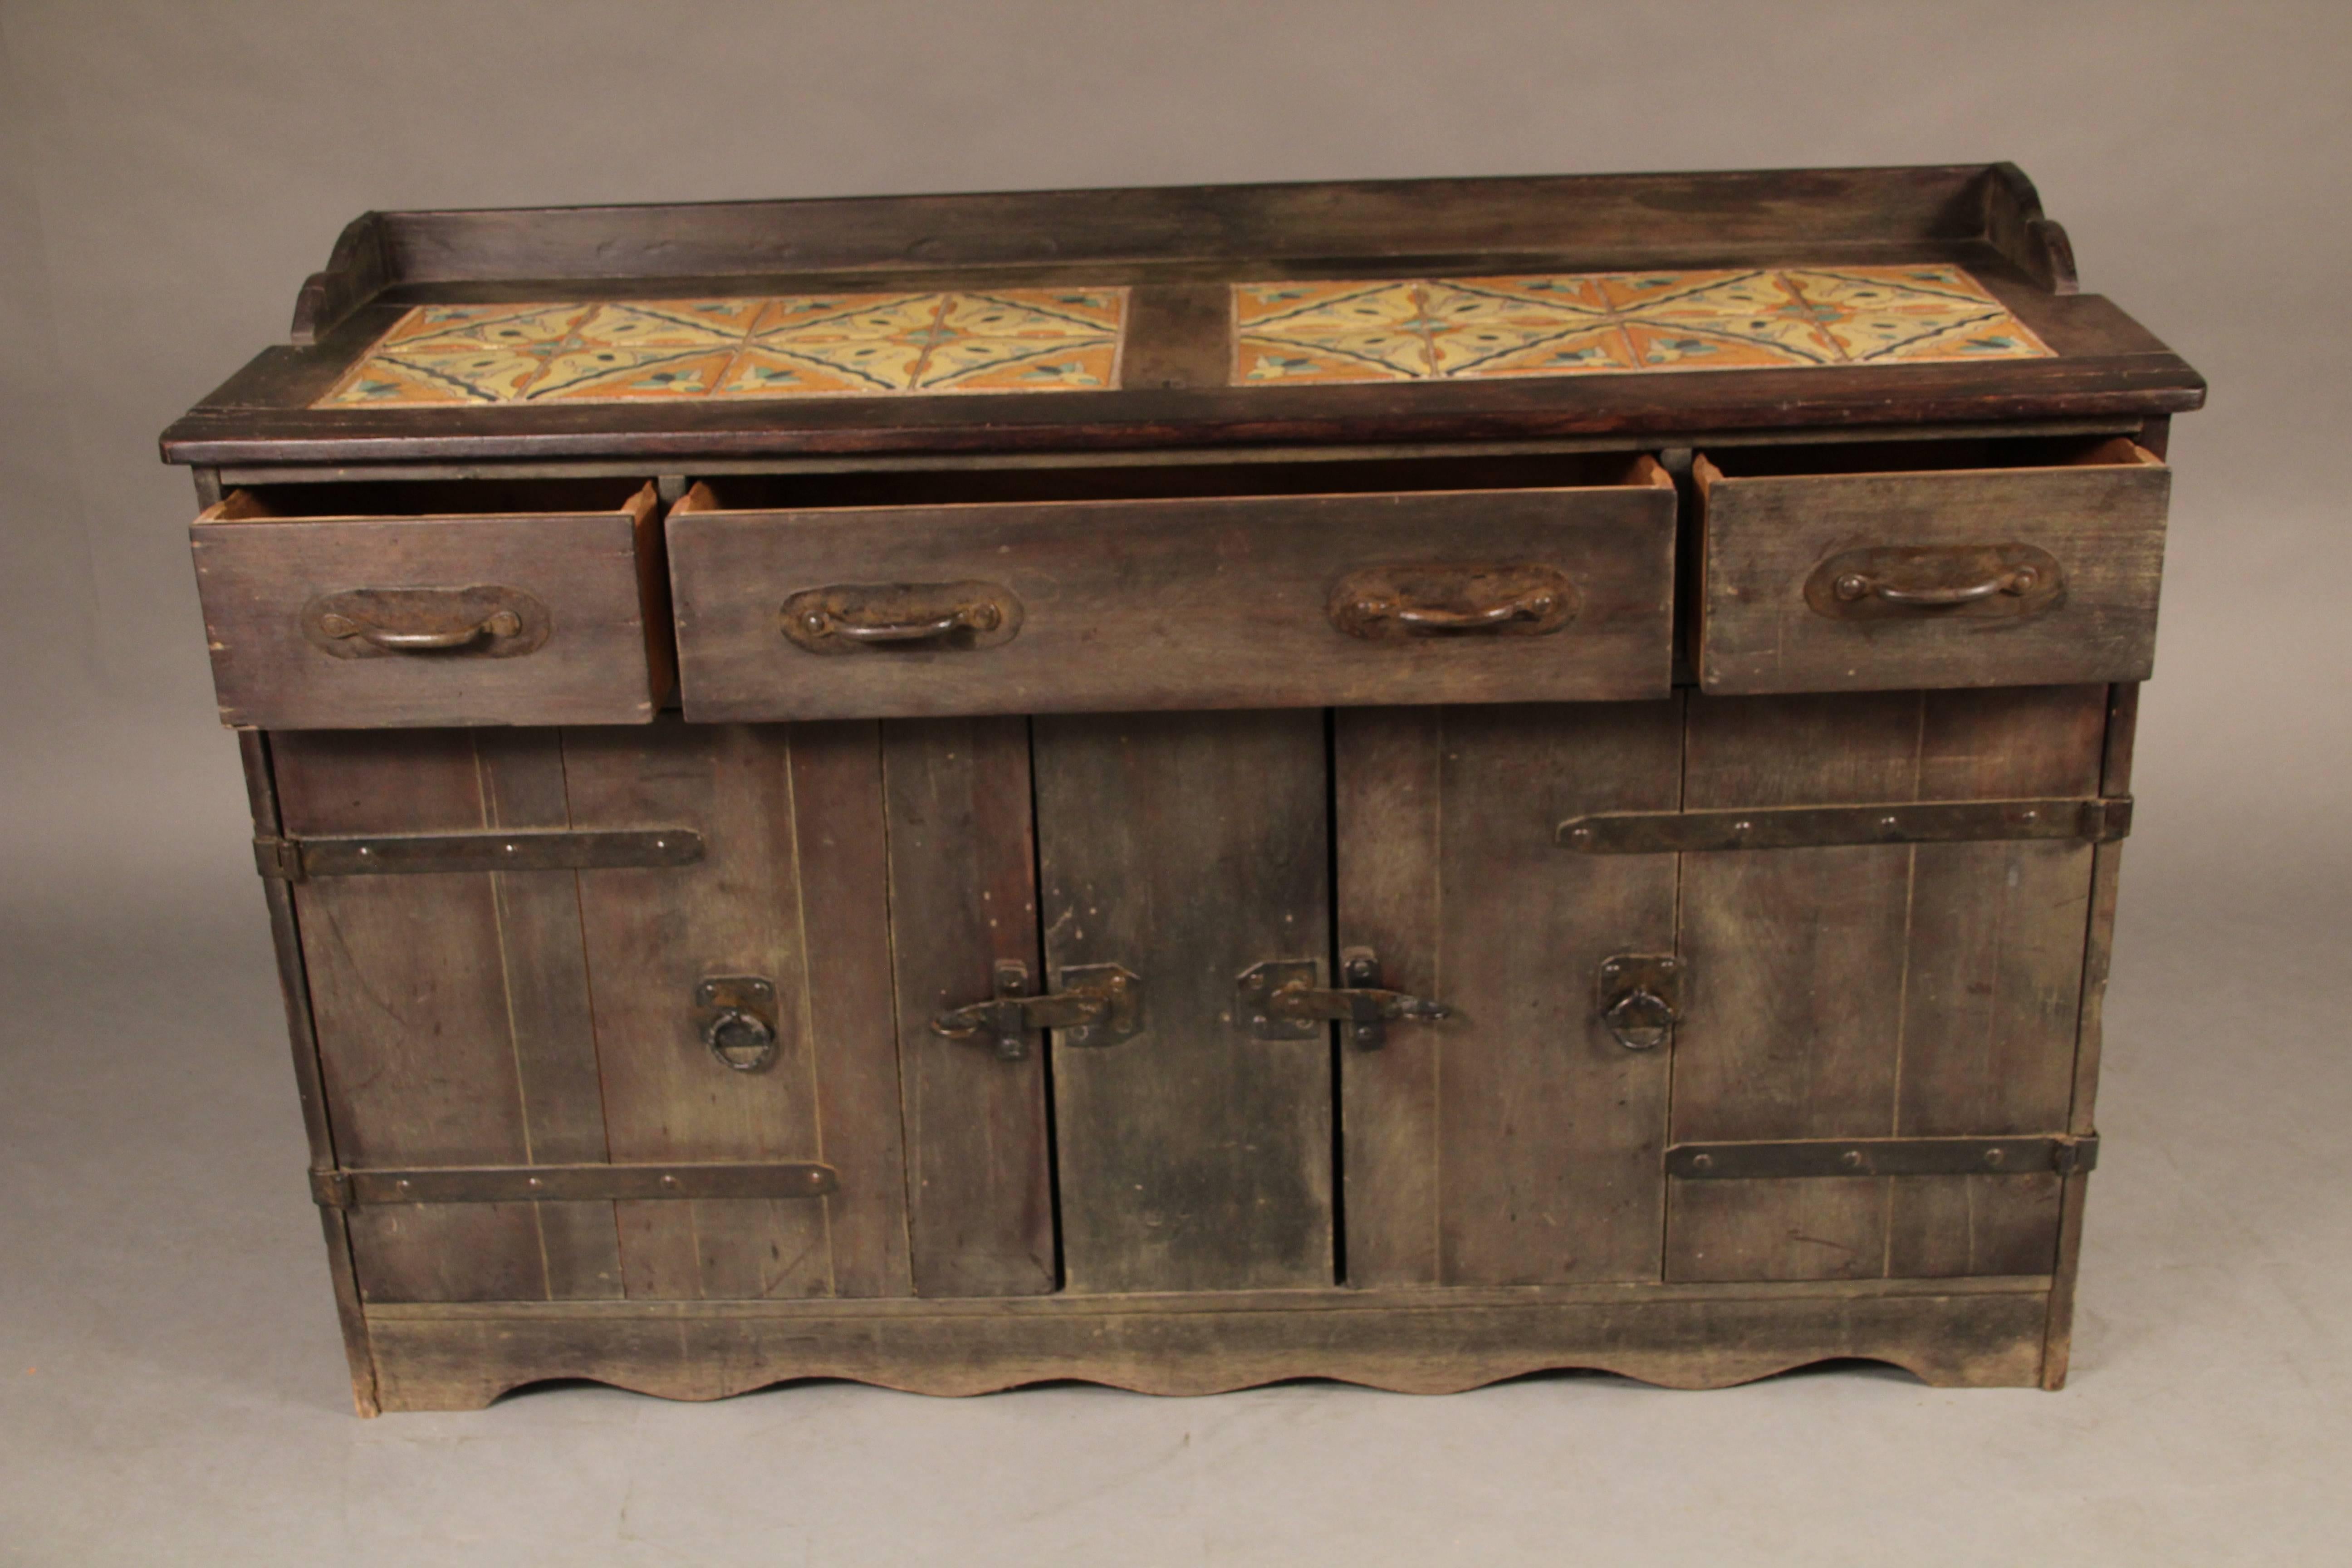 Signed Monterey tile top sideboard with original old wood finish and great tile top, circa 1930s.